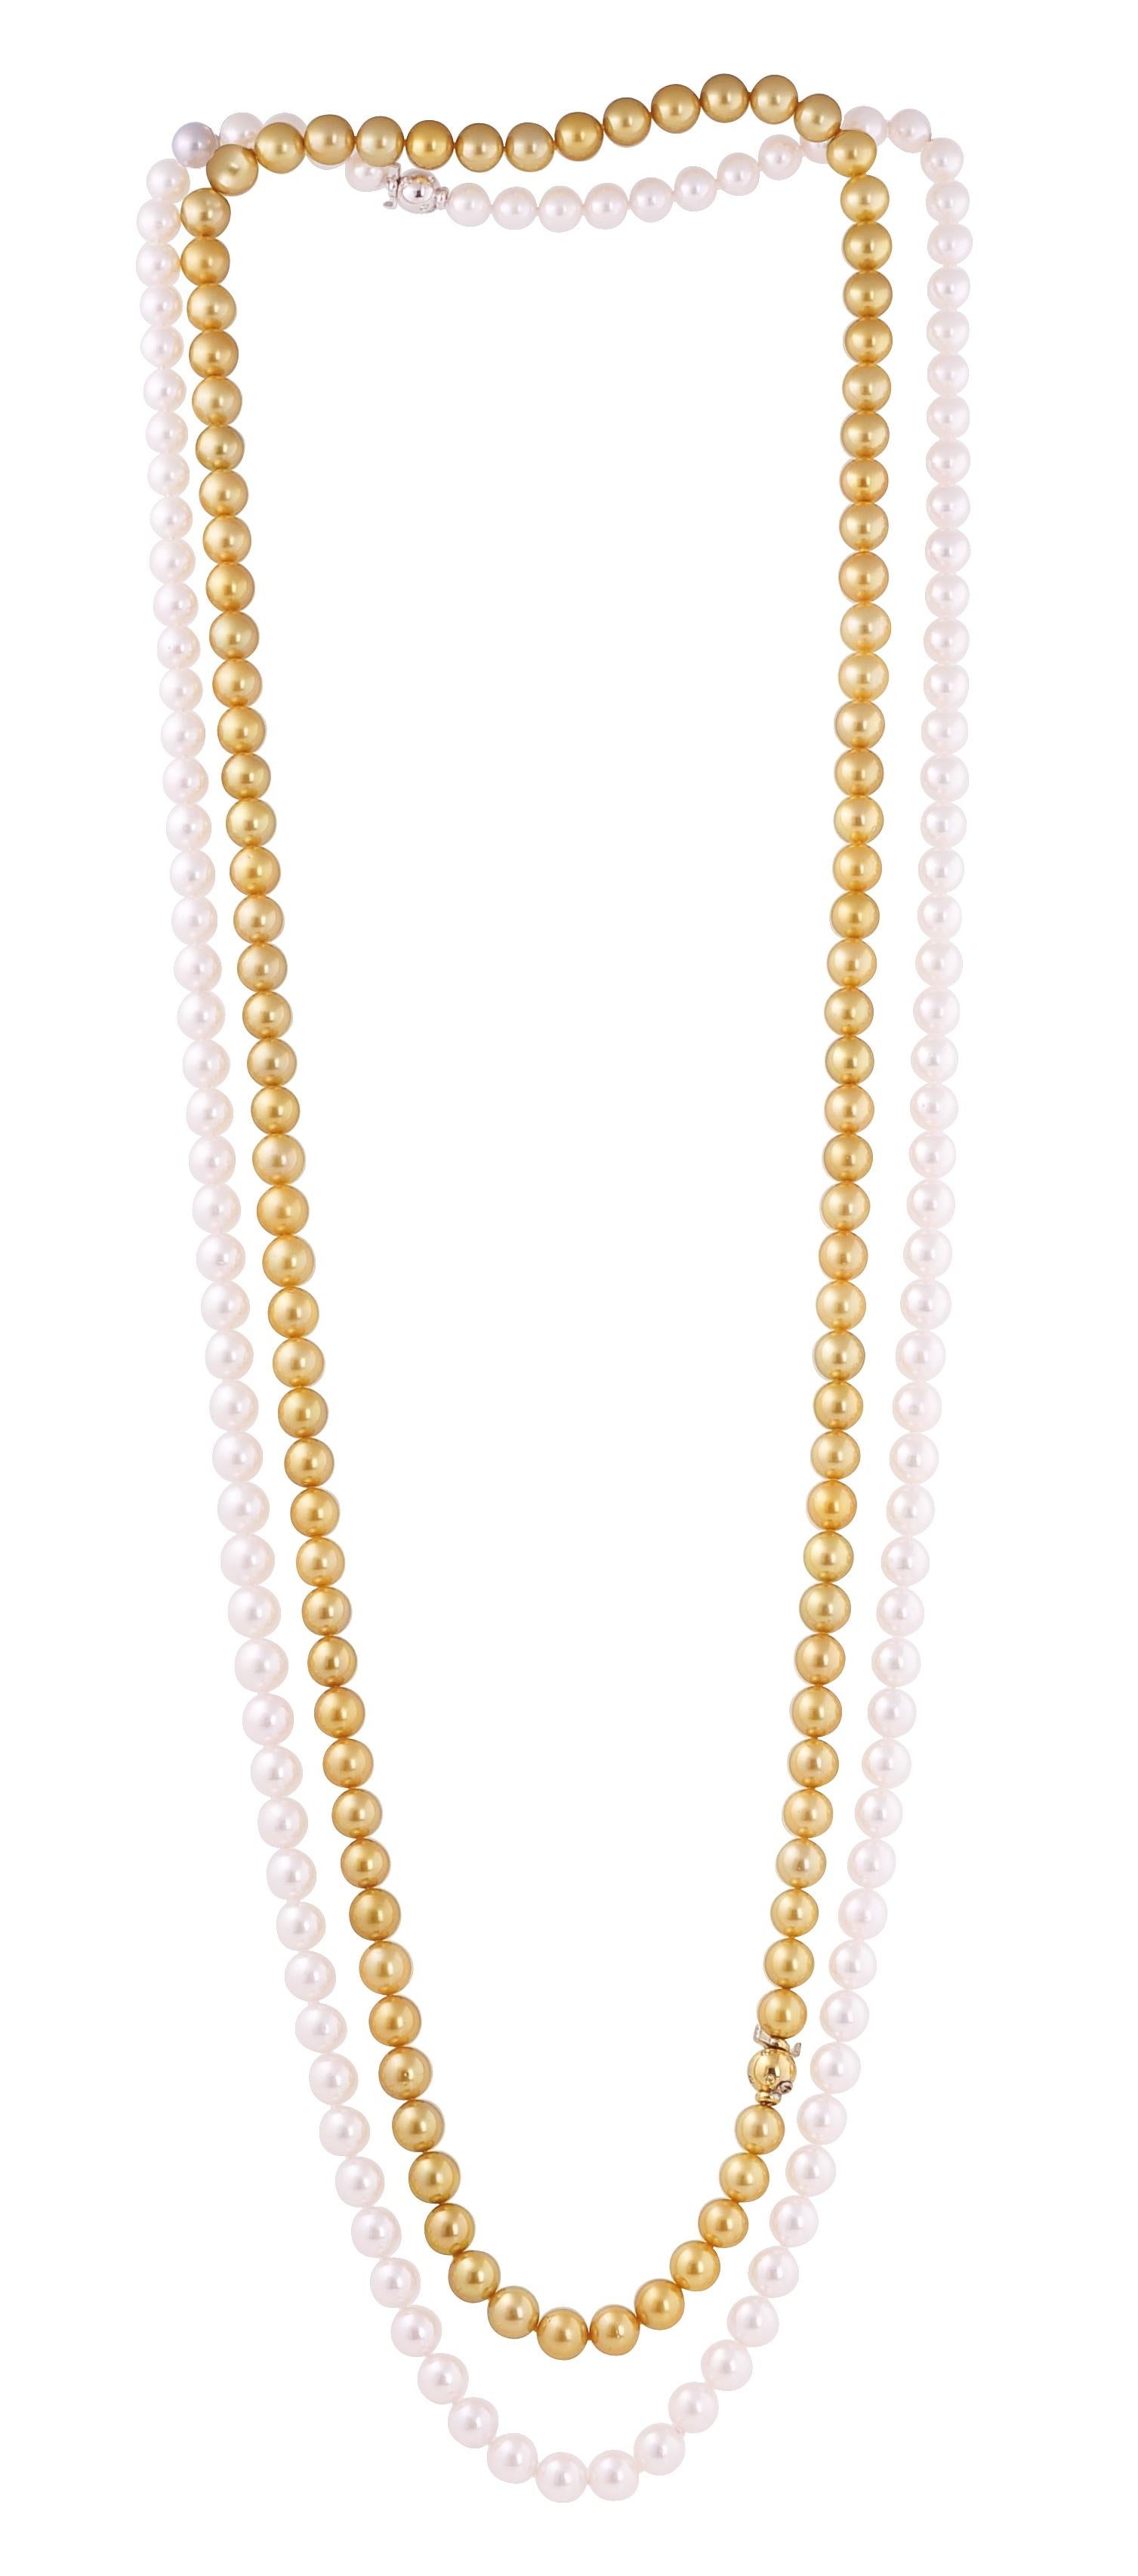 Ella Gafter Very Long White and Golden Pearl Necklace Set For Sale 7